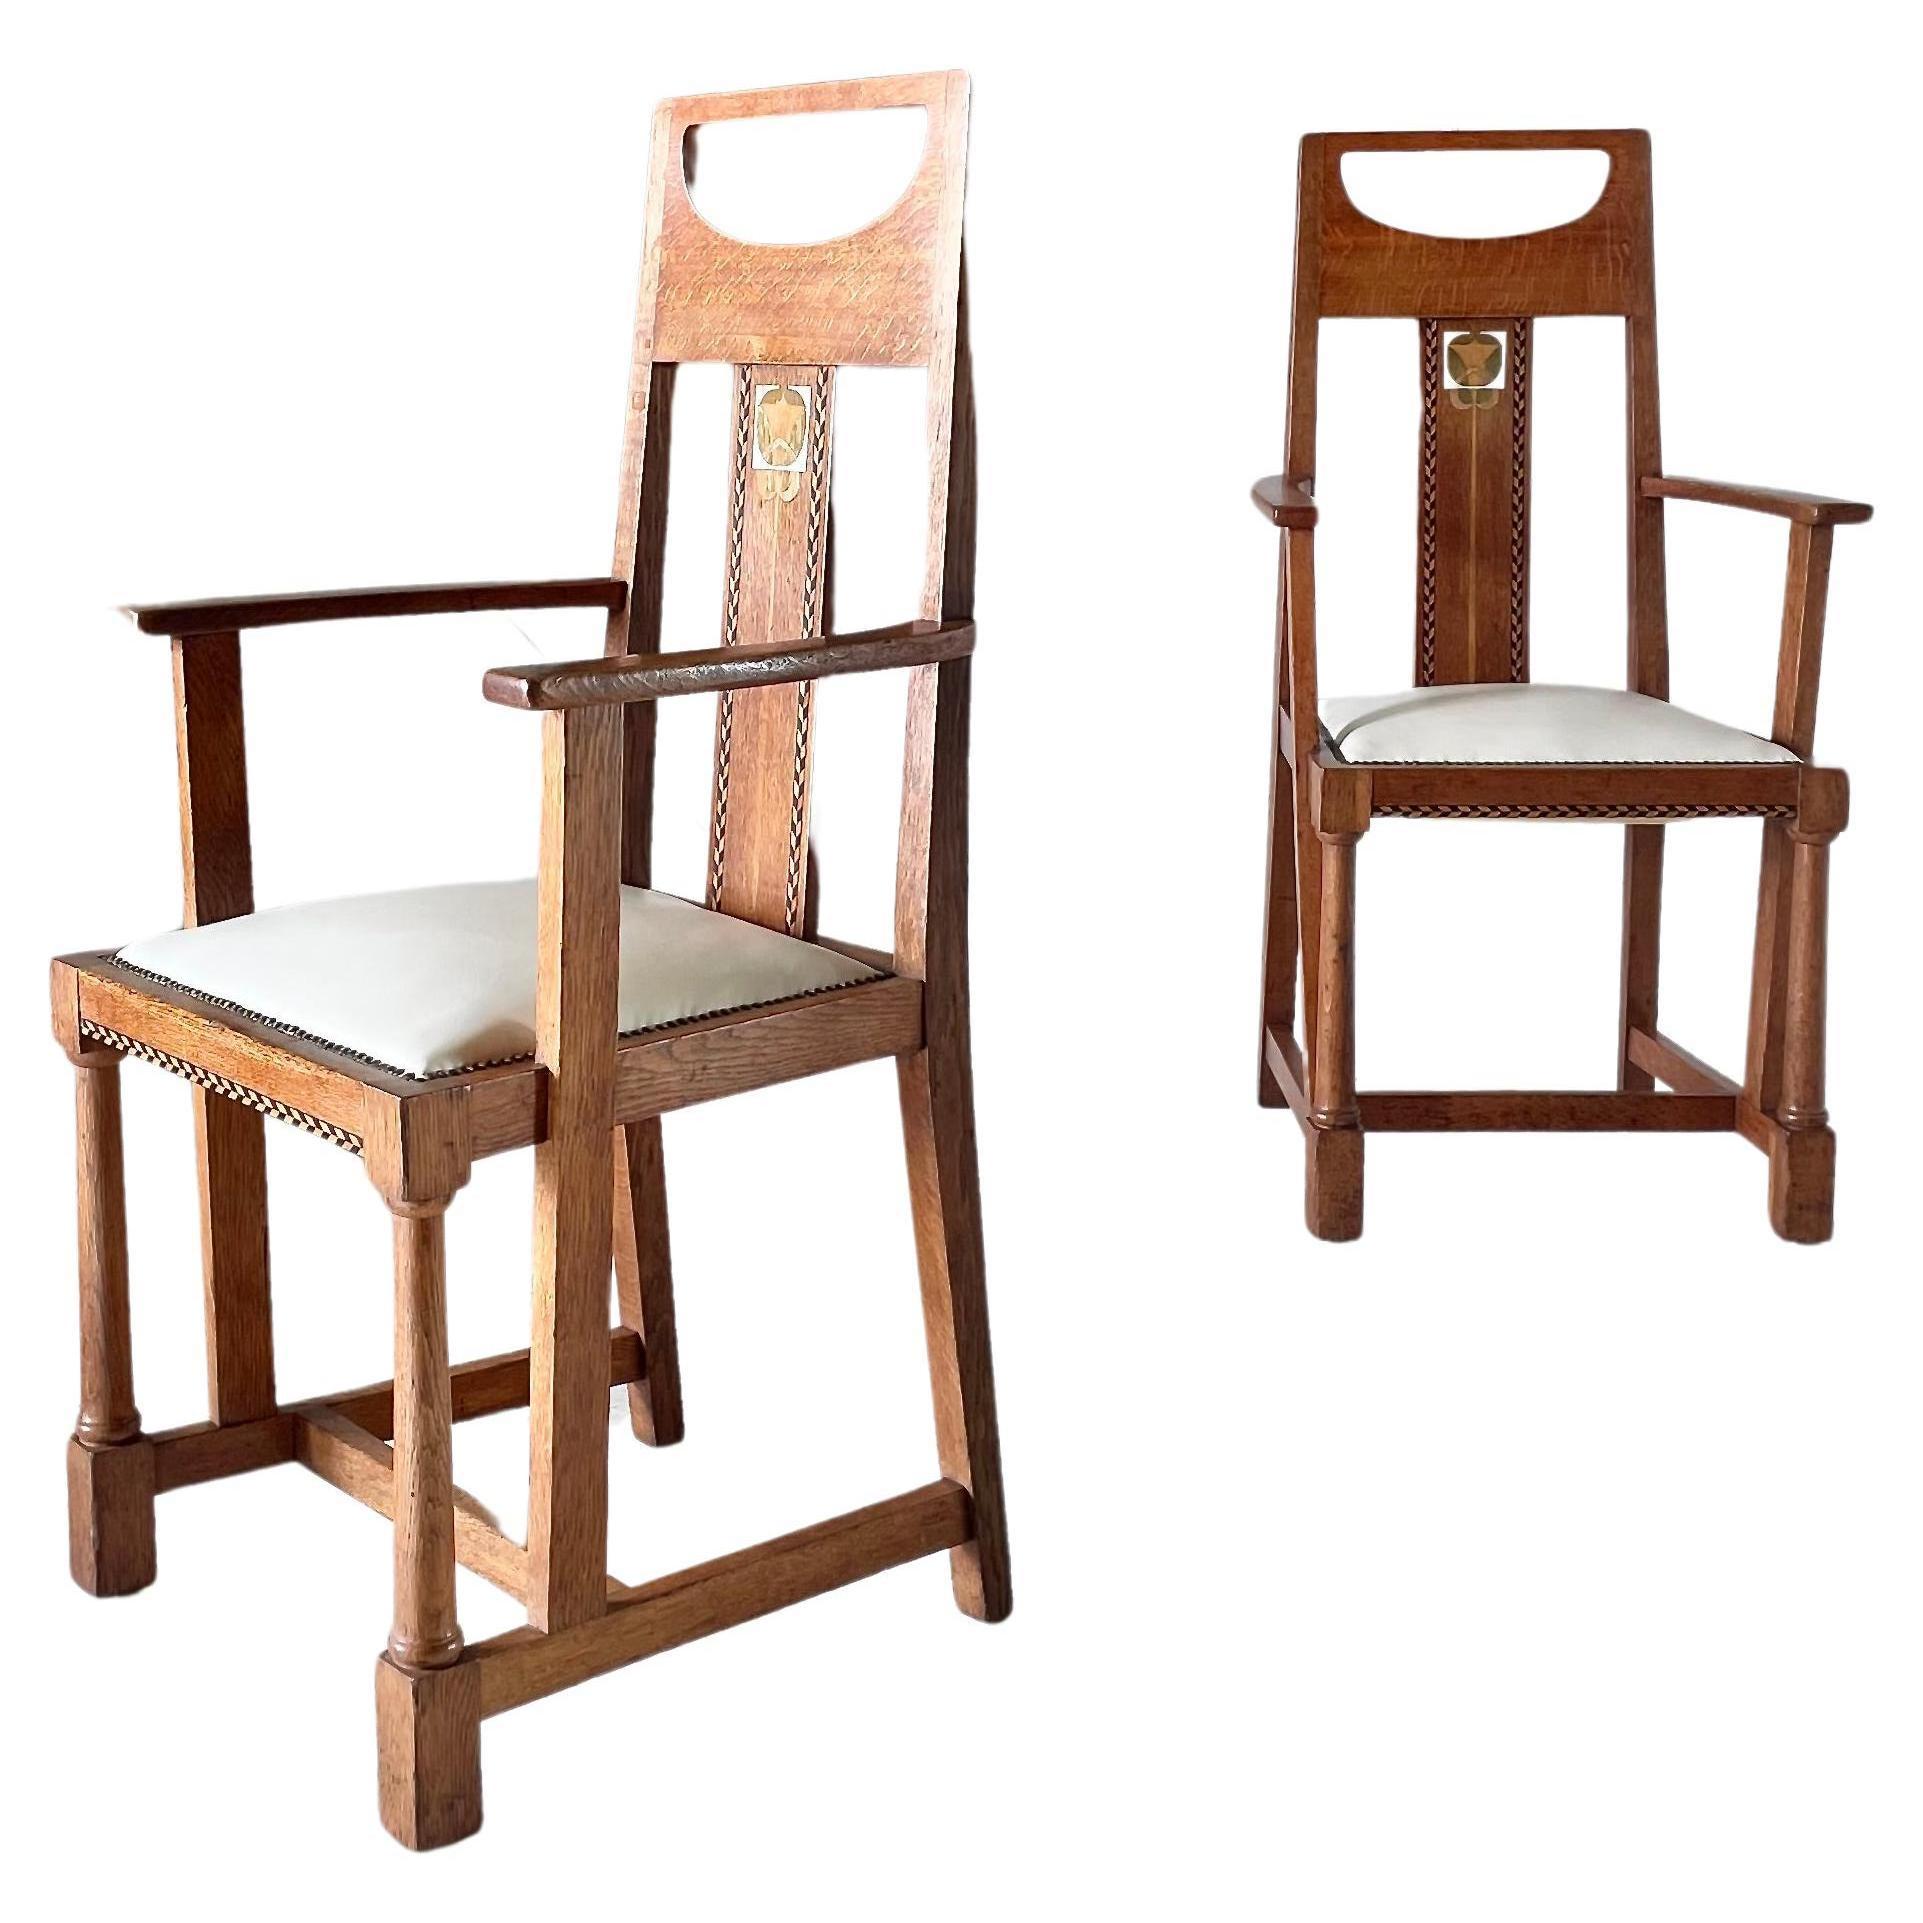 Pair of Arts and Crafts carver chairs designed by G.M. Ellwood 1905